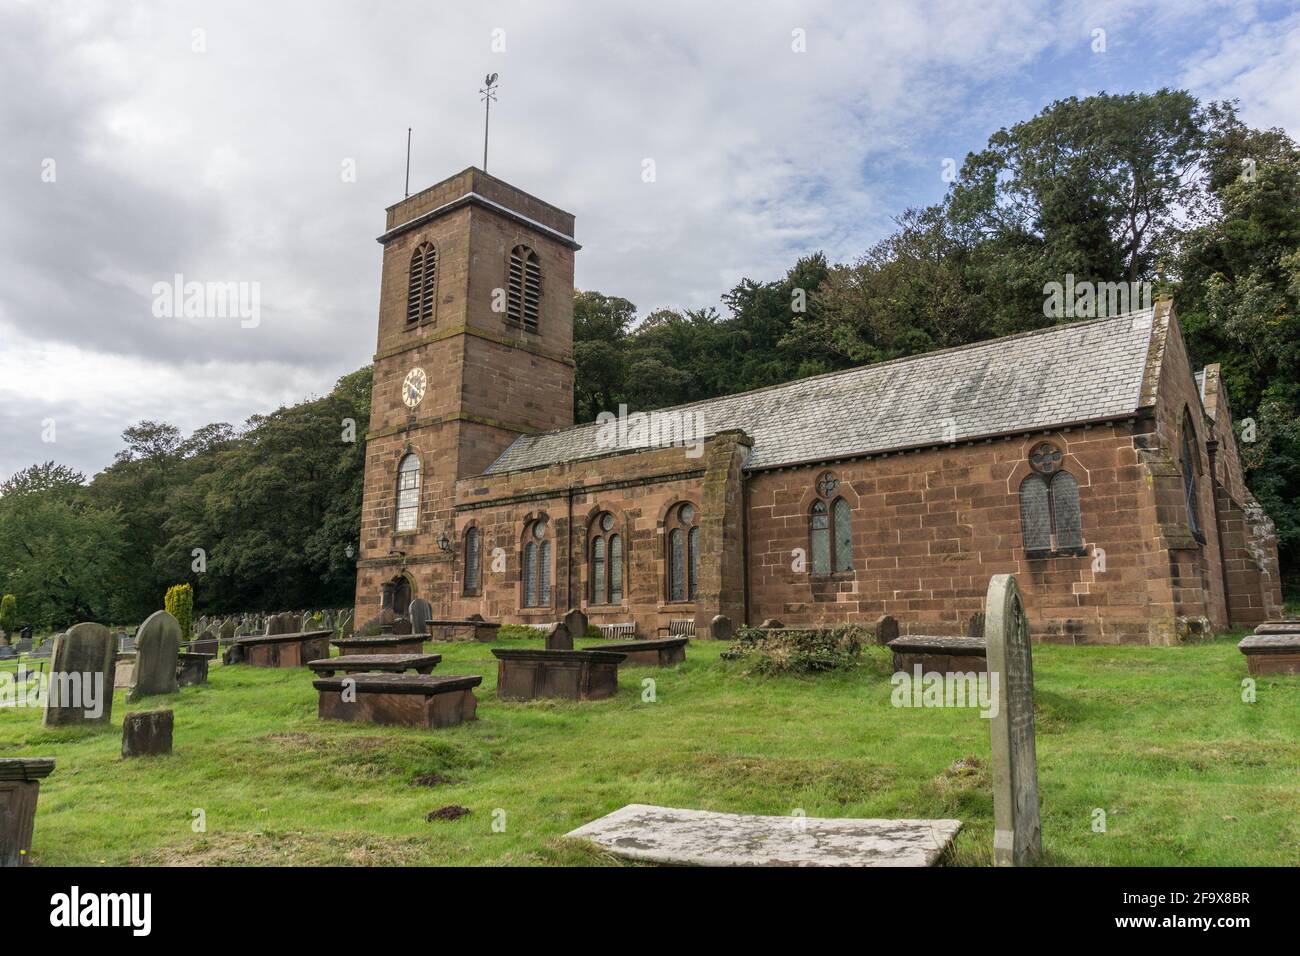 The Anglican parish church of St Nicholas in the village of Burton, Wirral, UK; earliest parts date from 14th century Stock Photo